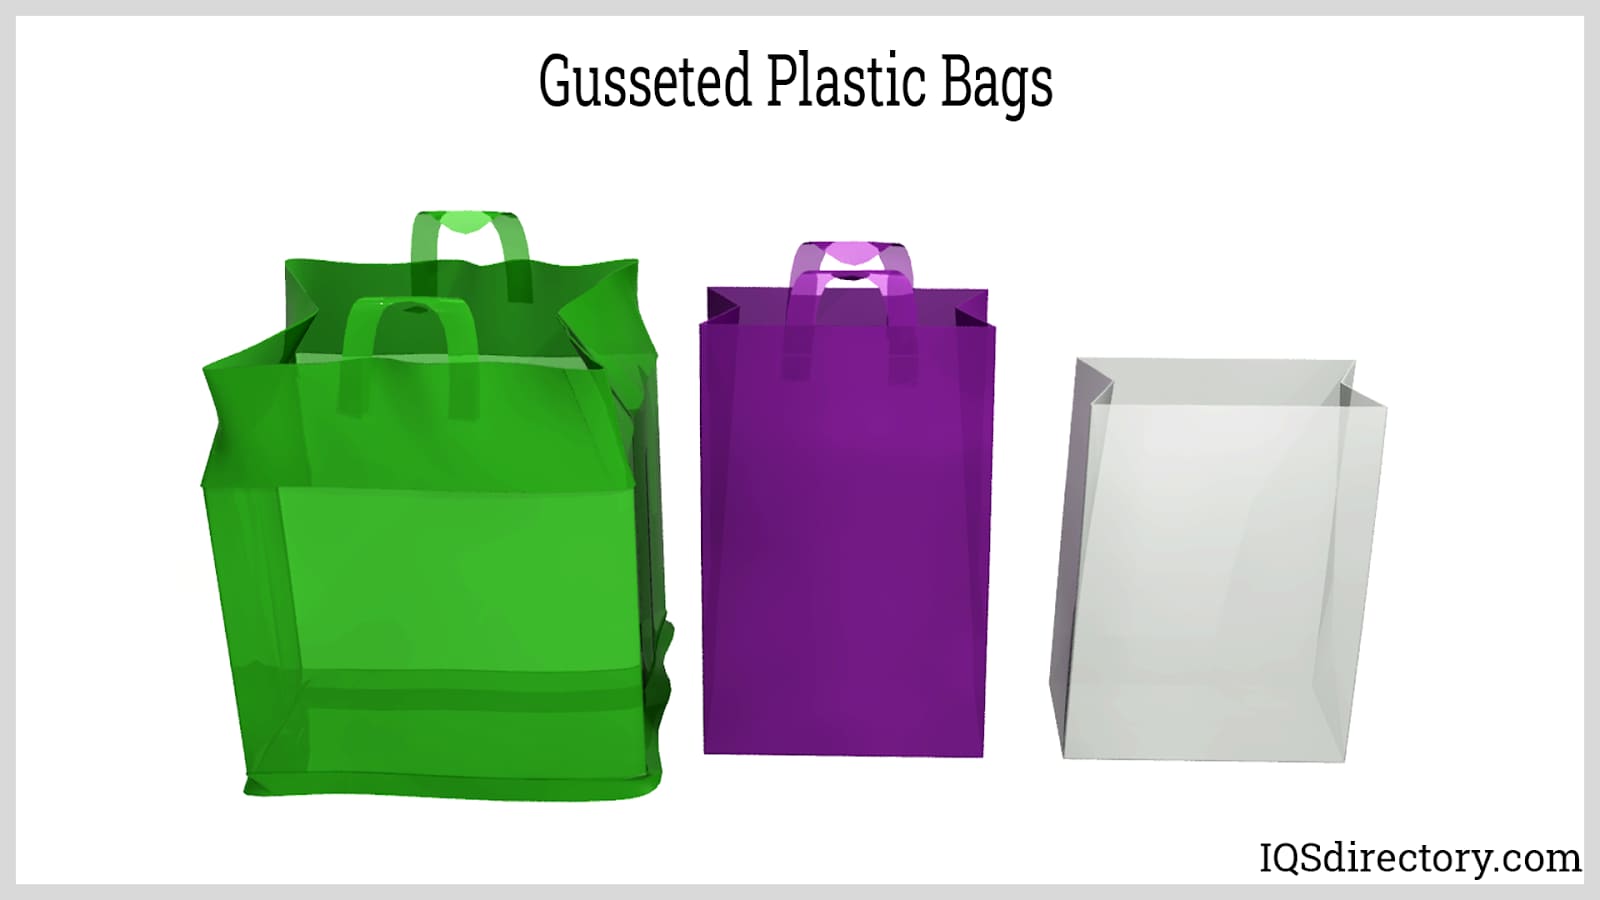 Gusseted Plastic Bags